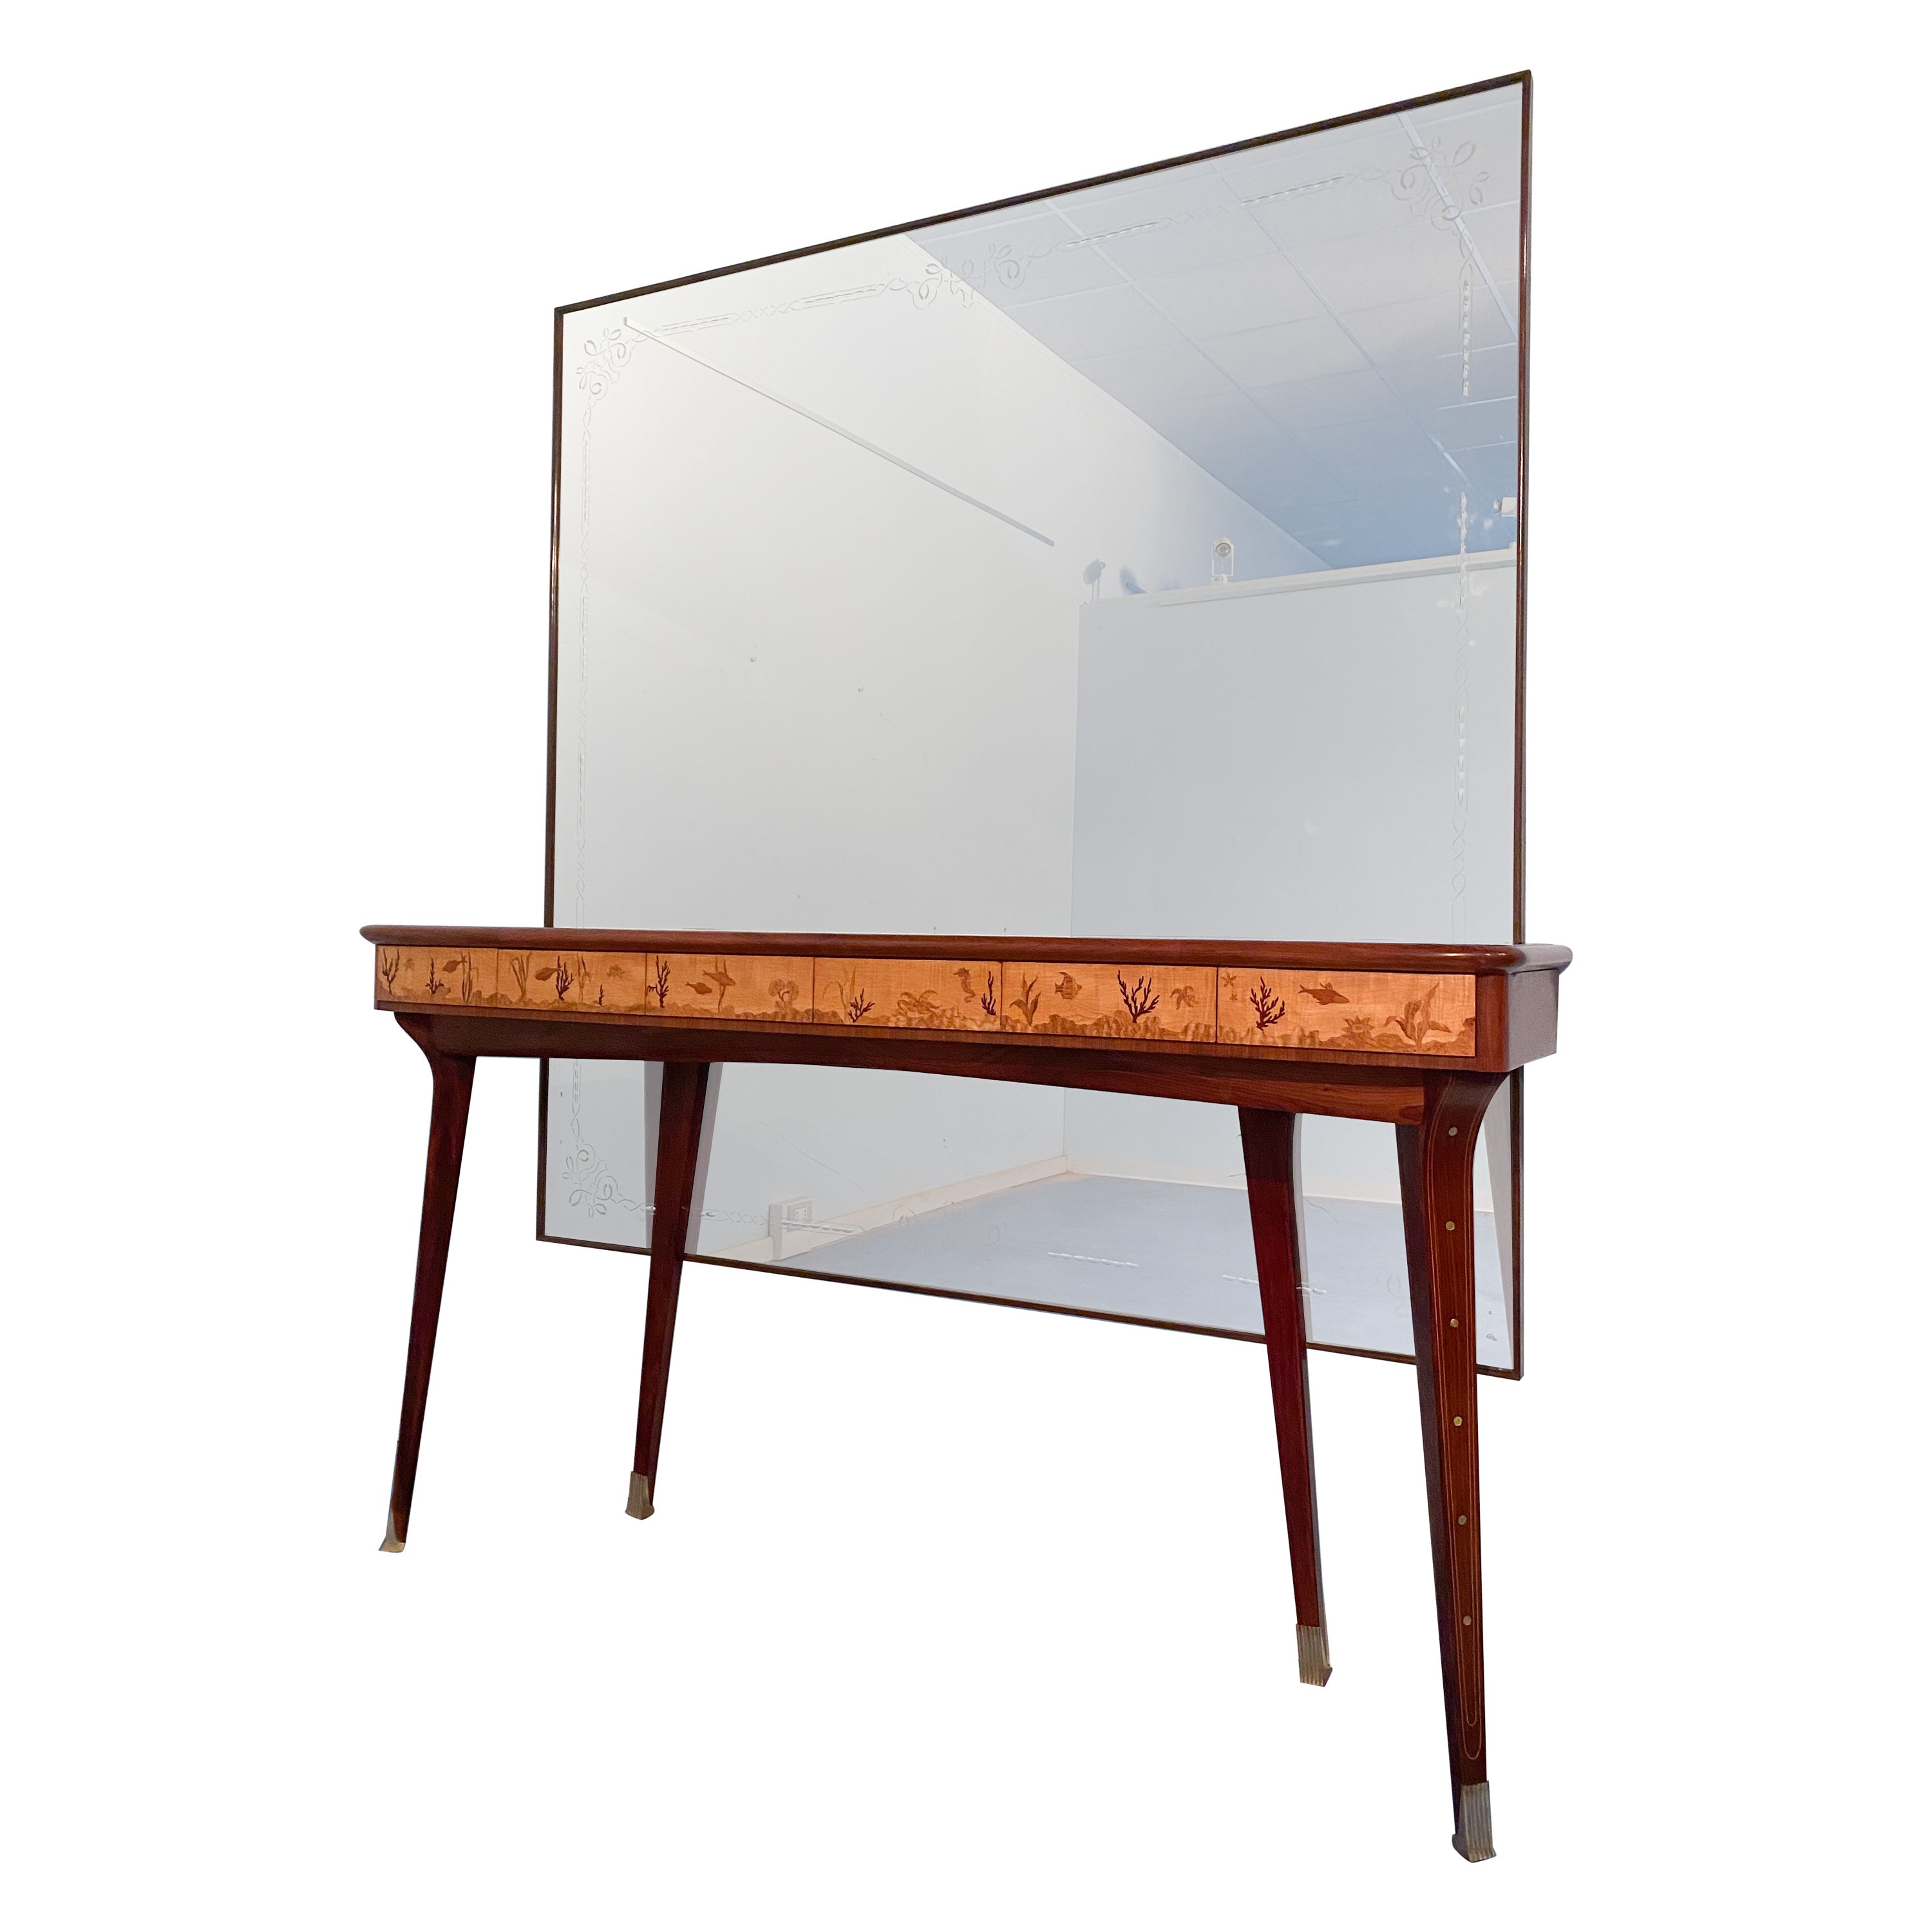 Italian Midcentury Inlaid Console with Mirror by Andrea Gusmai, 1950s For Sale